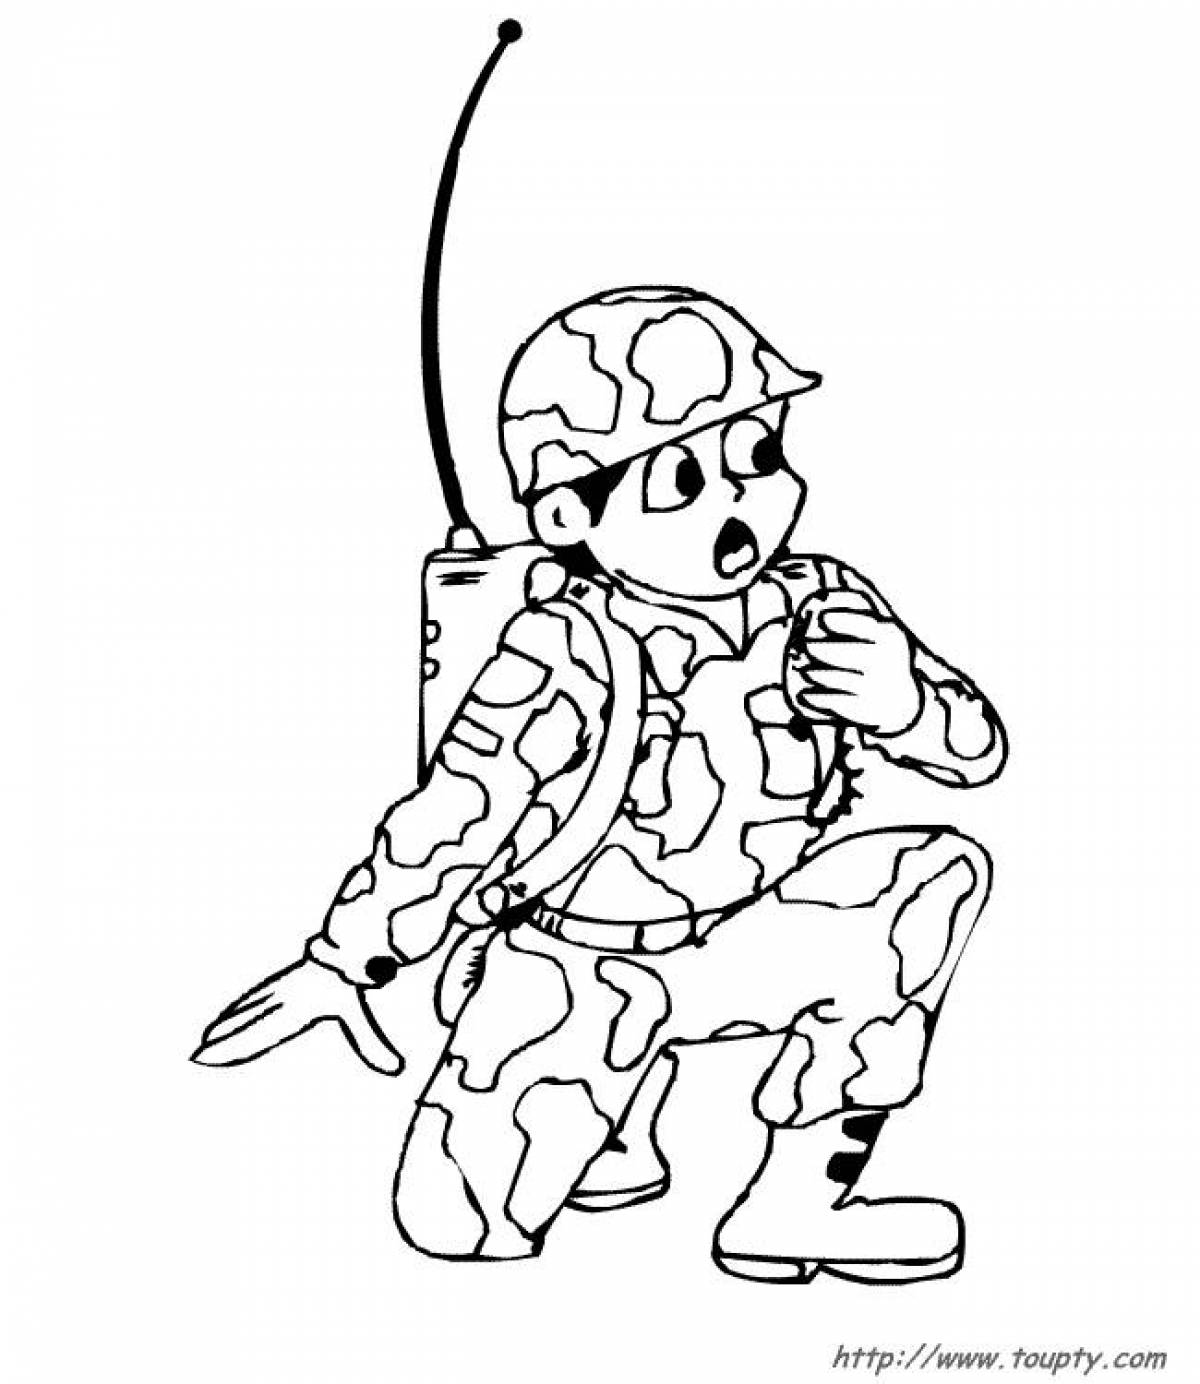 Coloring book outstanding soldier for kids